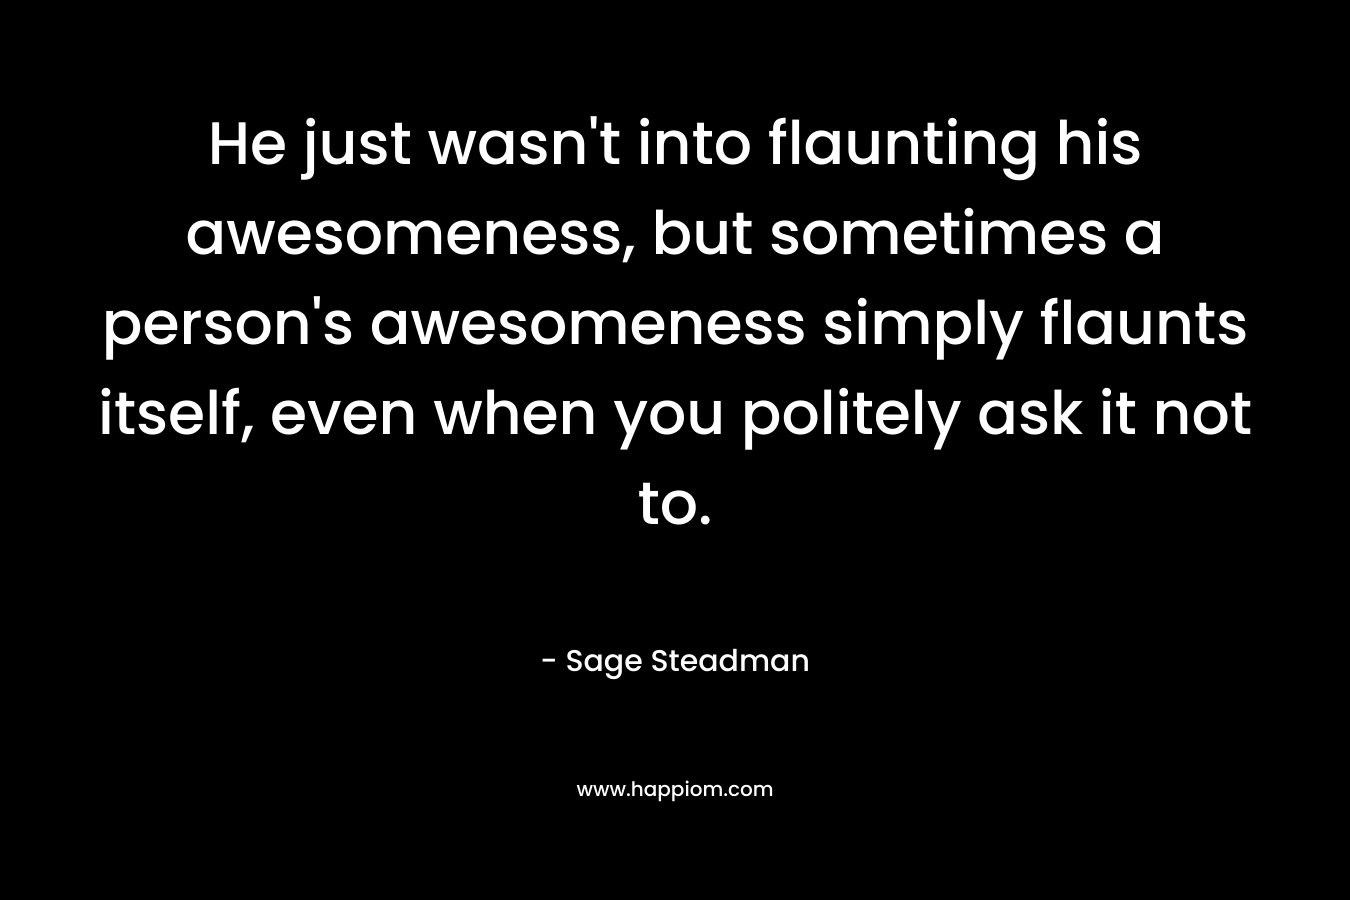 He just wasn’t into flaunting his awesomeness, but sometimes a person’s awesomeness simply flaunts itself, even when you politely ask it not to. – Sage Steadman